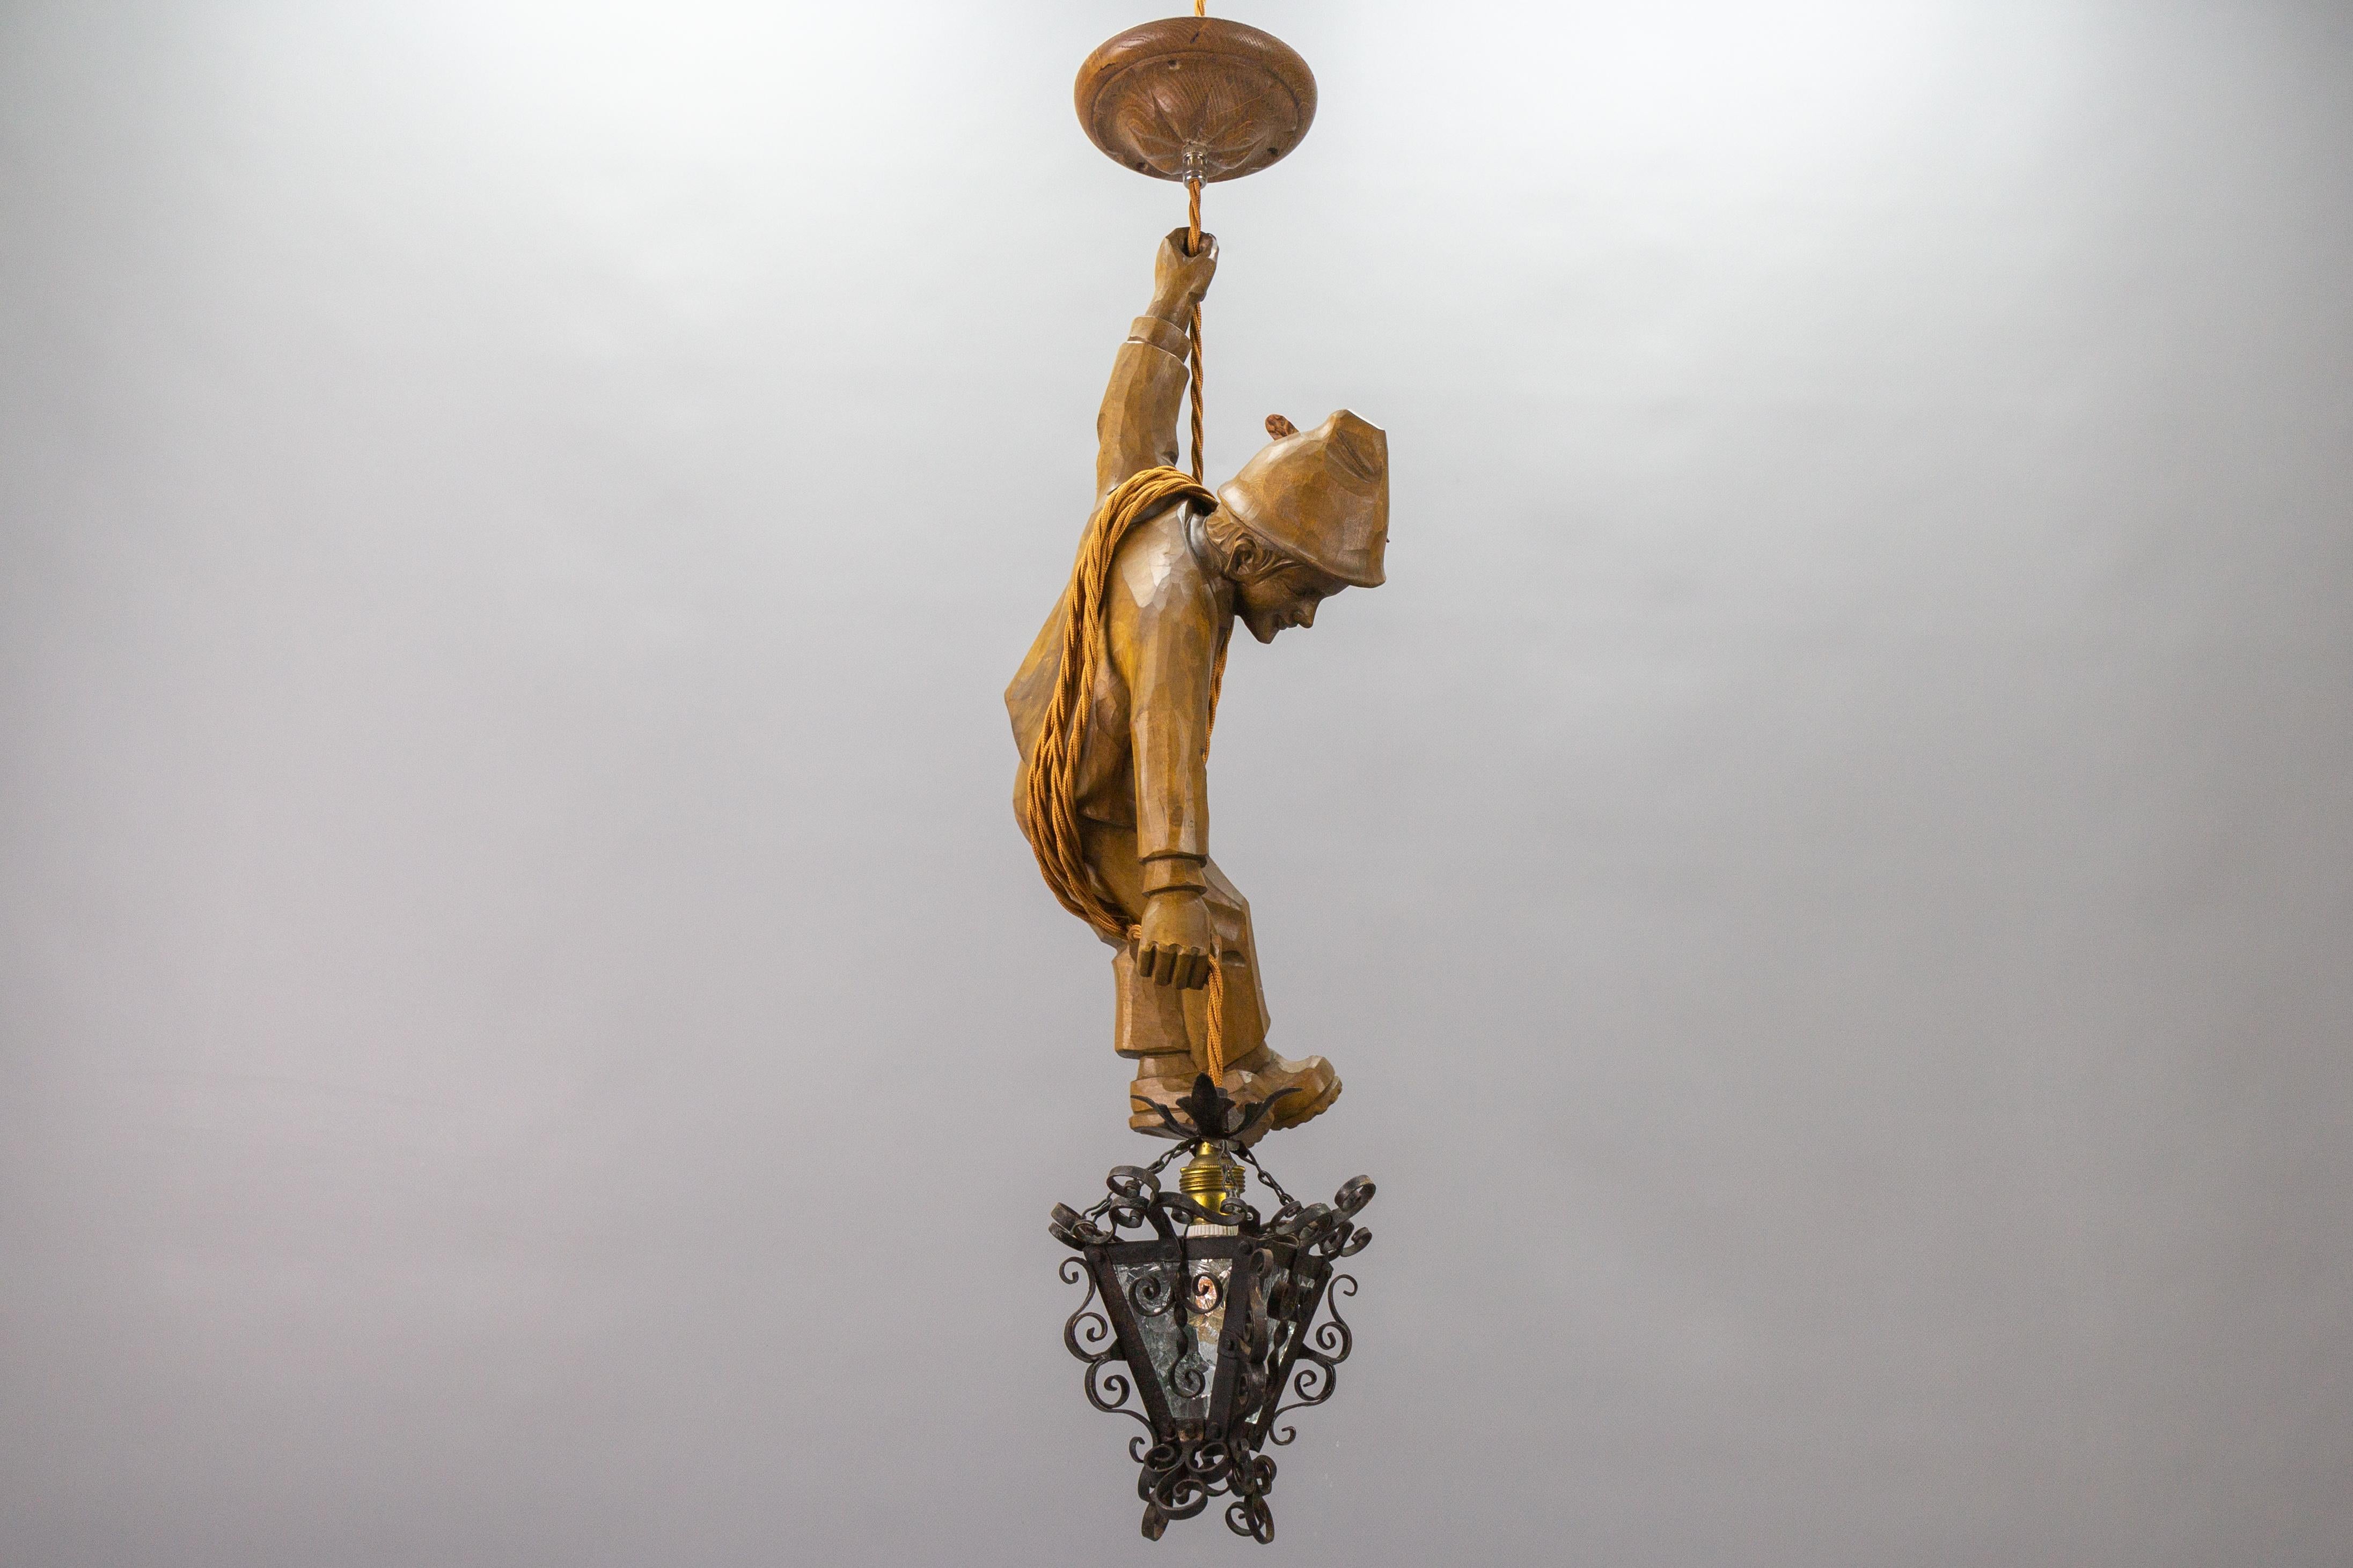 German Pendant Light Hand Carved Wooden Figure Mountain Climber with Lantern For Sale 2